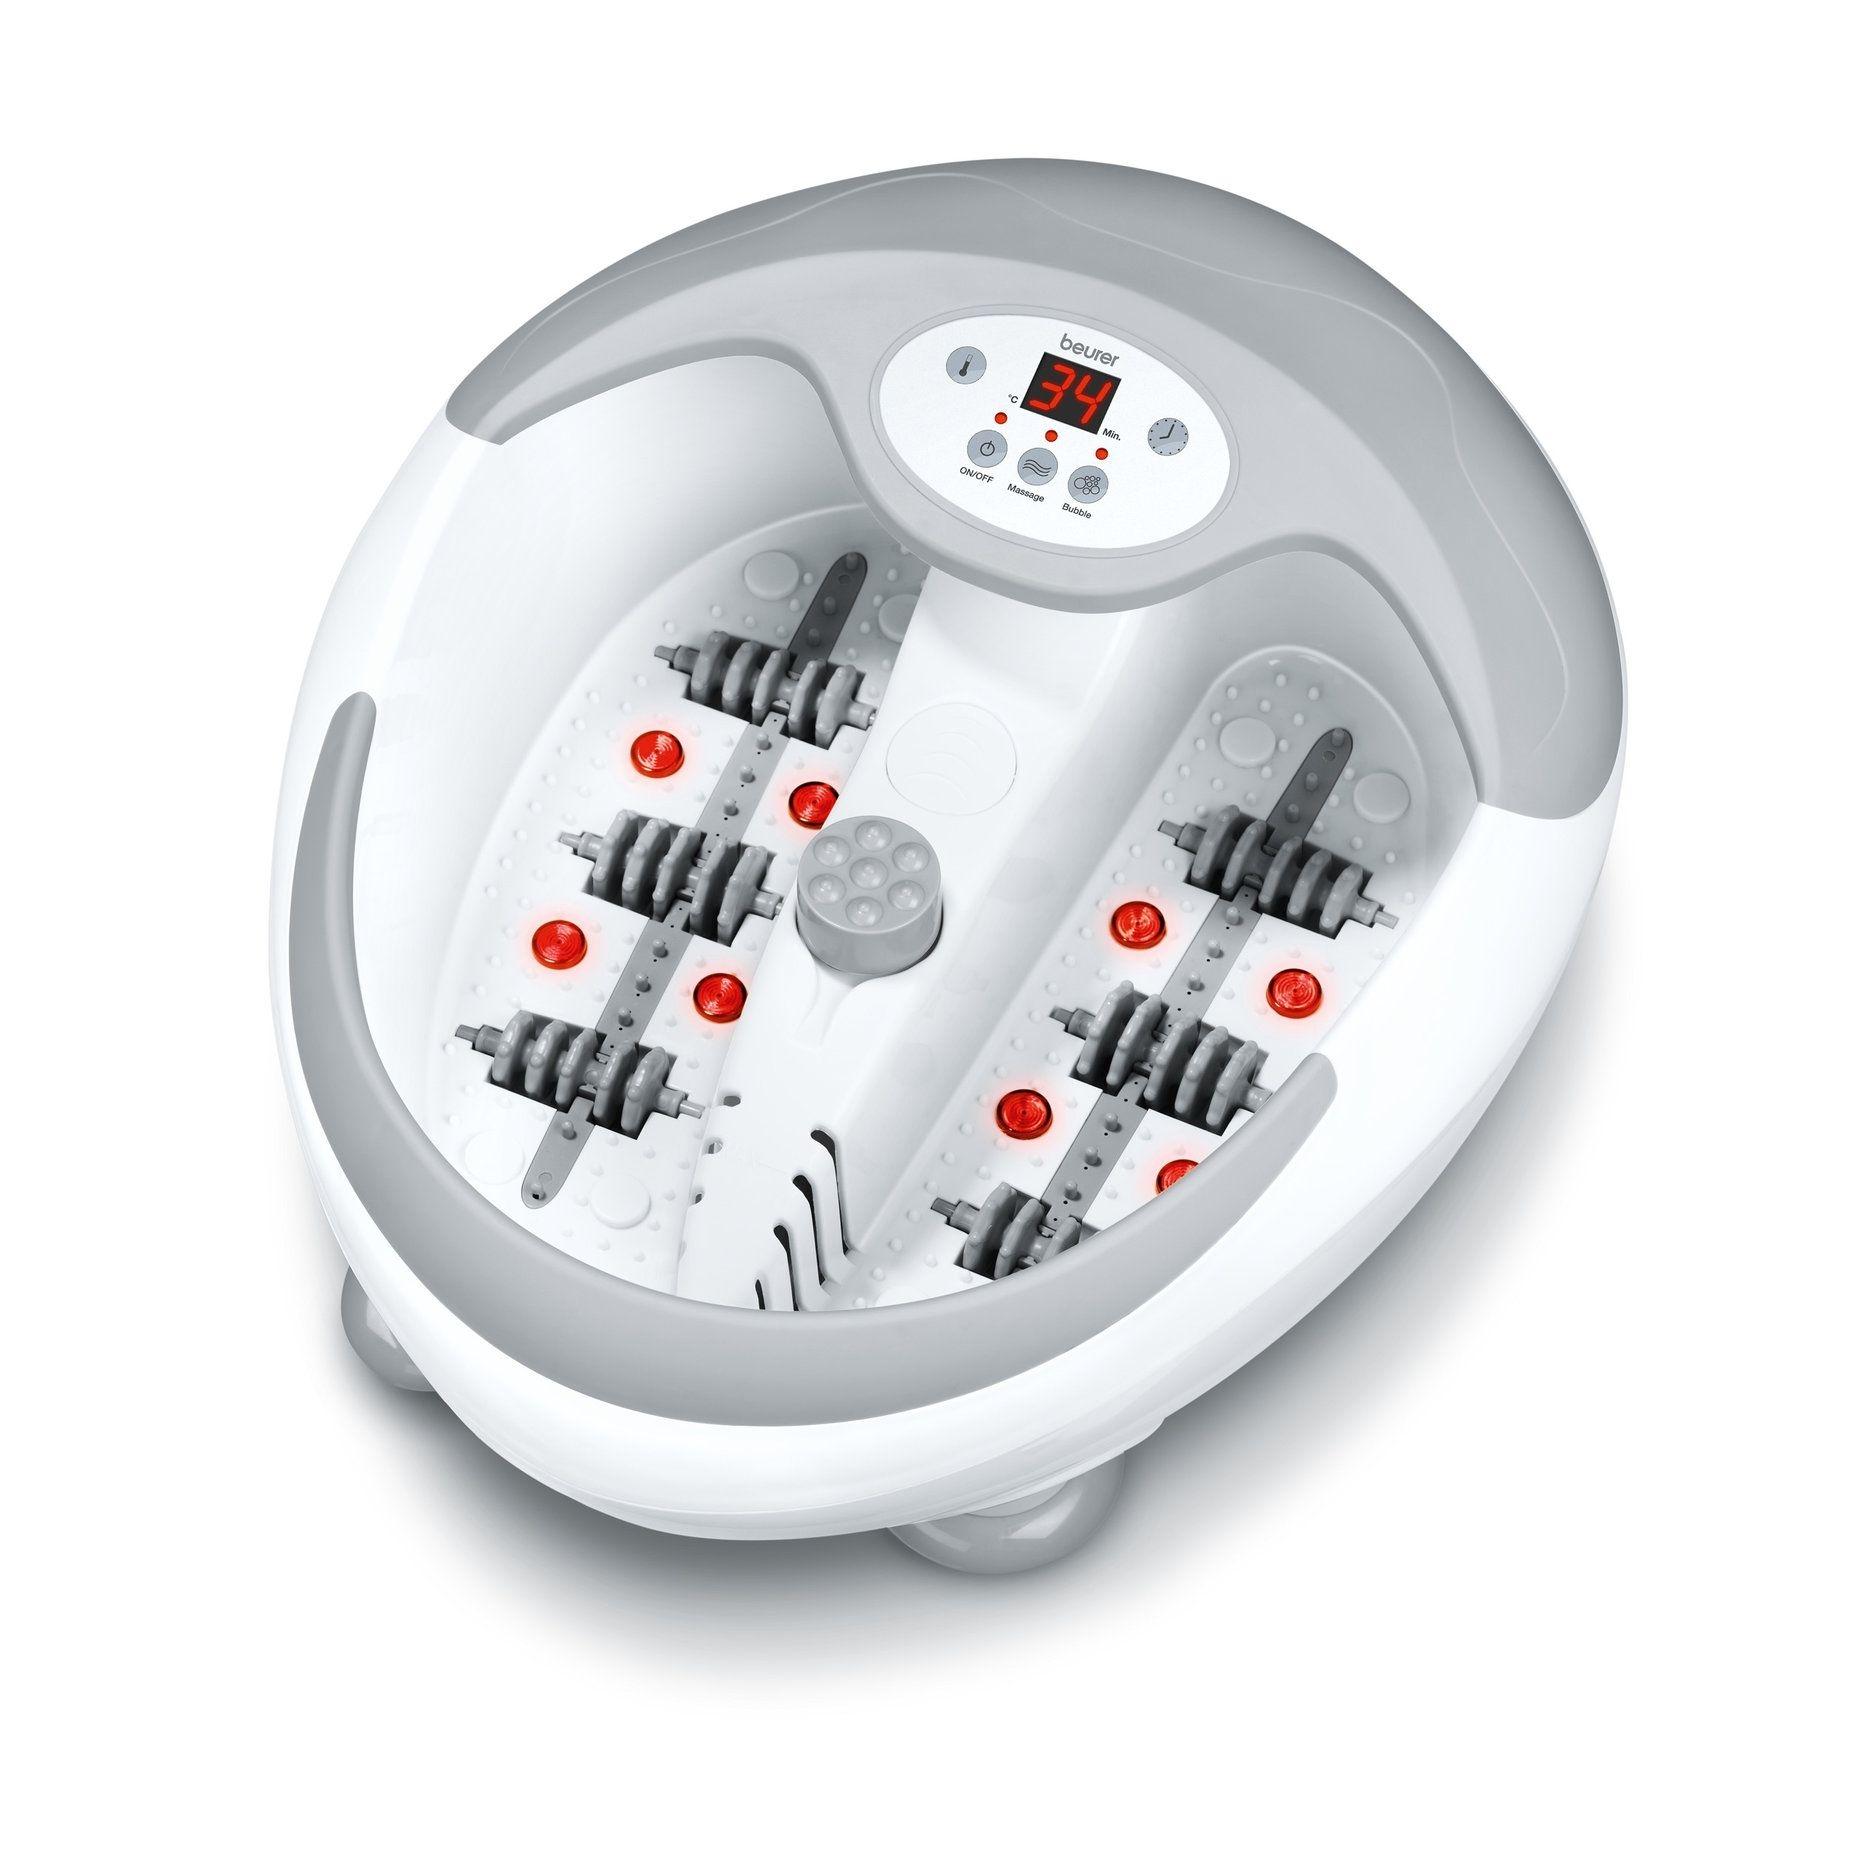 Foot Spa and Massager FB-50 Beurer